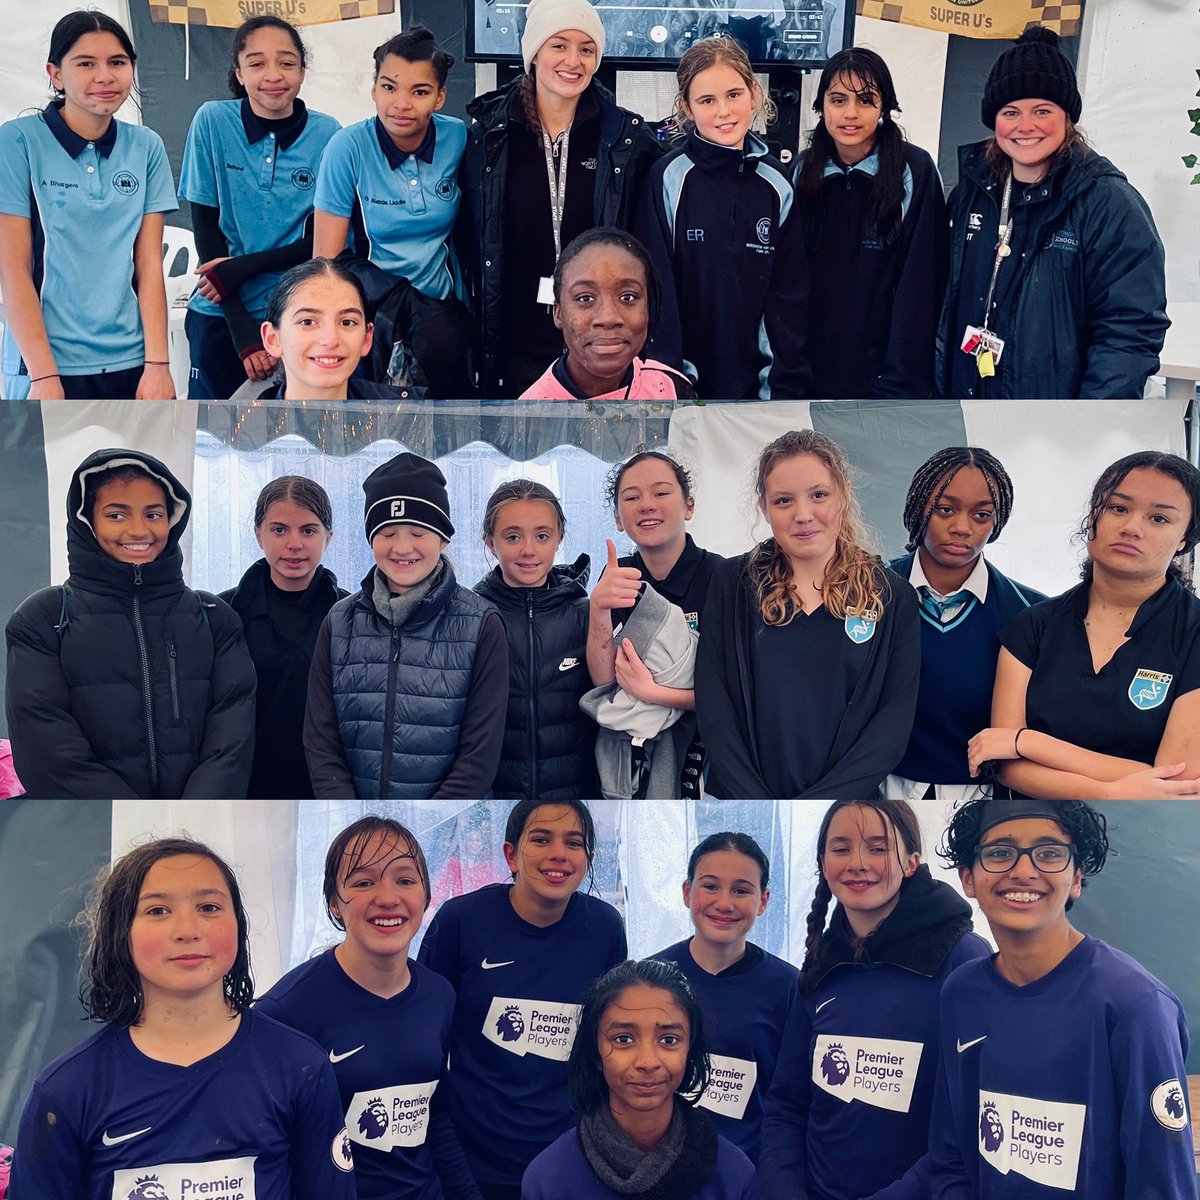 We held out 1st Girls U13 Cup this week. Huge congratulations to @RoseberySchool1 for becoming our fist ever winners.

Thanks all the schools that took part. The weather was terrible but it didn’t stop the players enjoying the day! @EFLTrust @EFL 

#girlscup